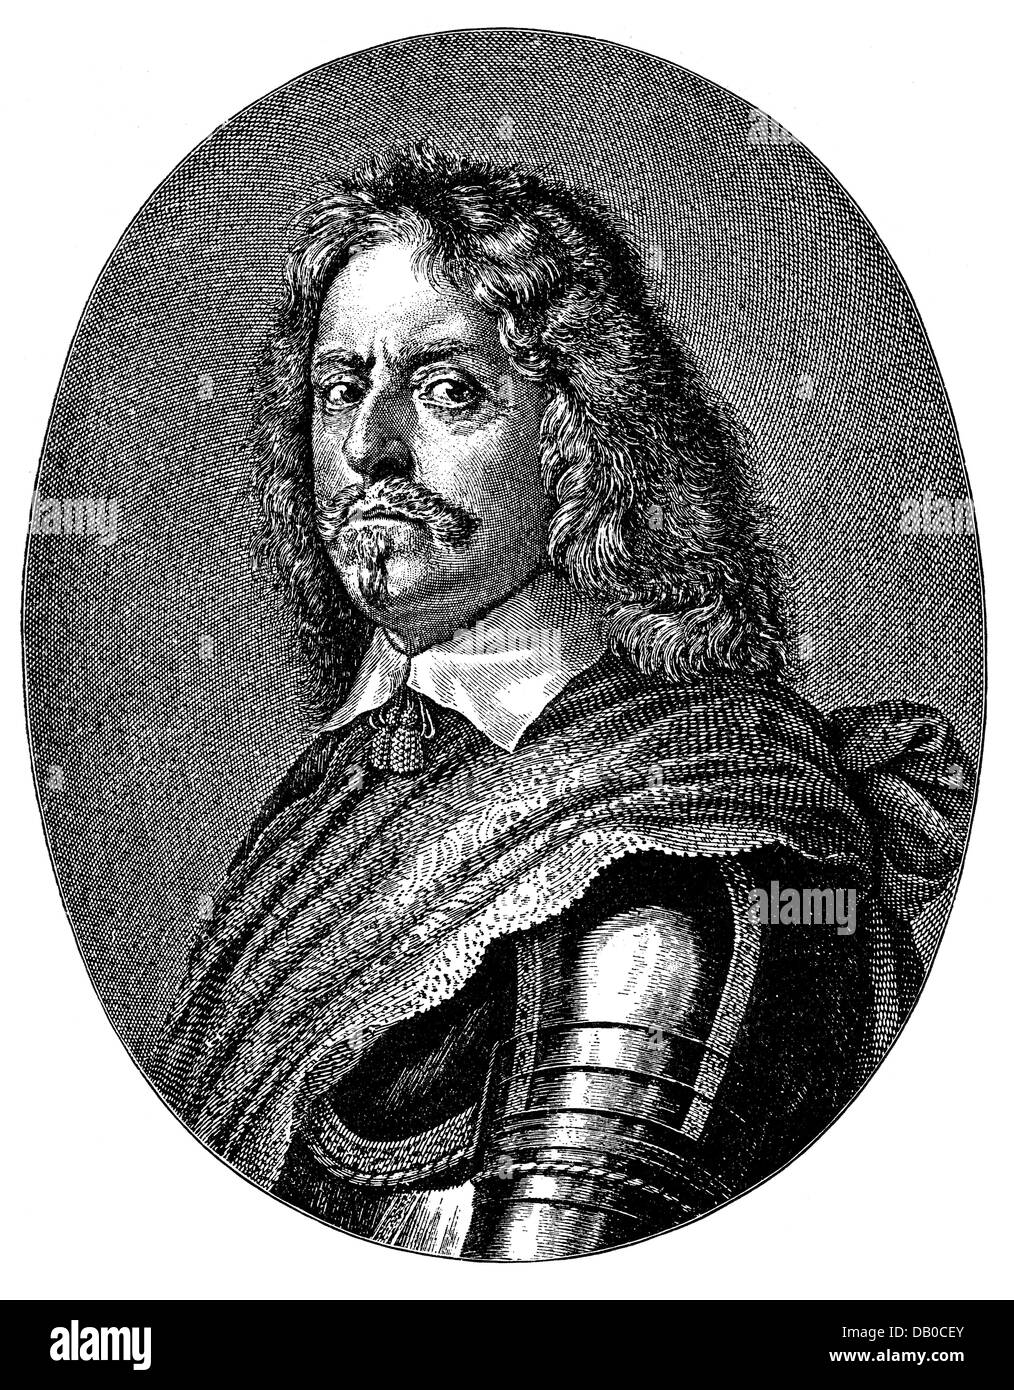 Koenigsmarck, Hans Christopher count von, 4.3.1600 - 8.3.1663, Swedish general, portrait, copper engraving by Falck, 17th century, Artist's Copyright has not to be cleared Stock Photo